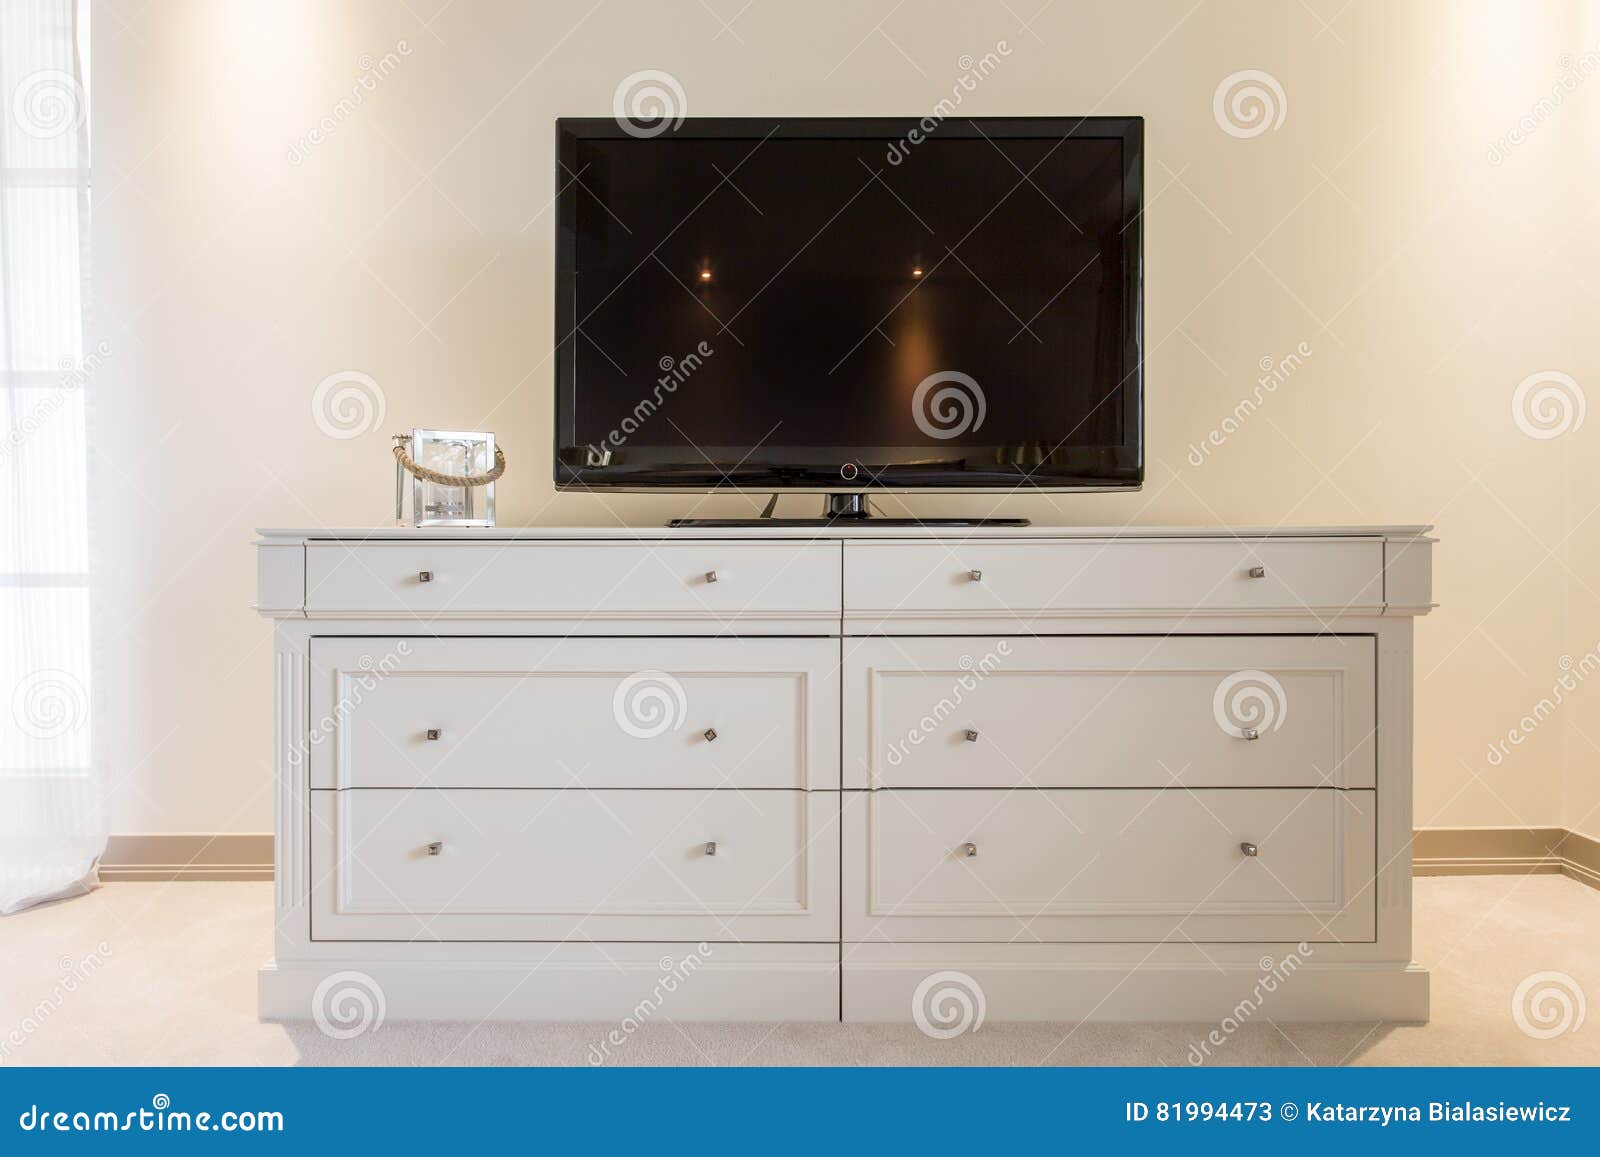 Flat Screen Tv On Cabinet Stock Image Image Of House 81994473